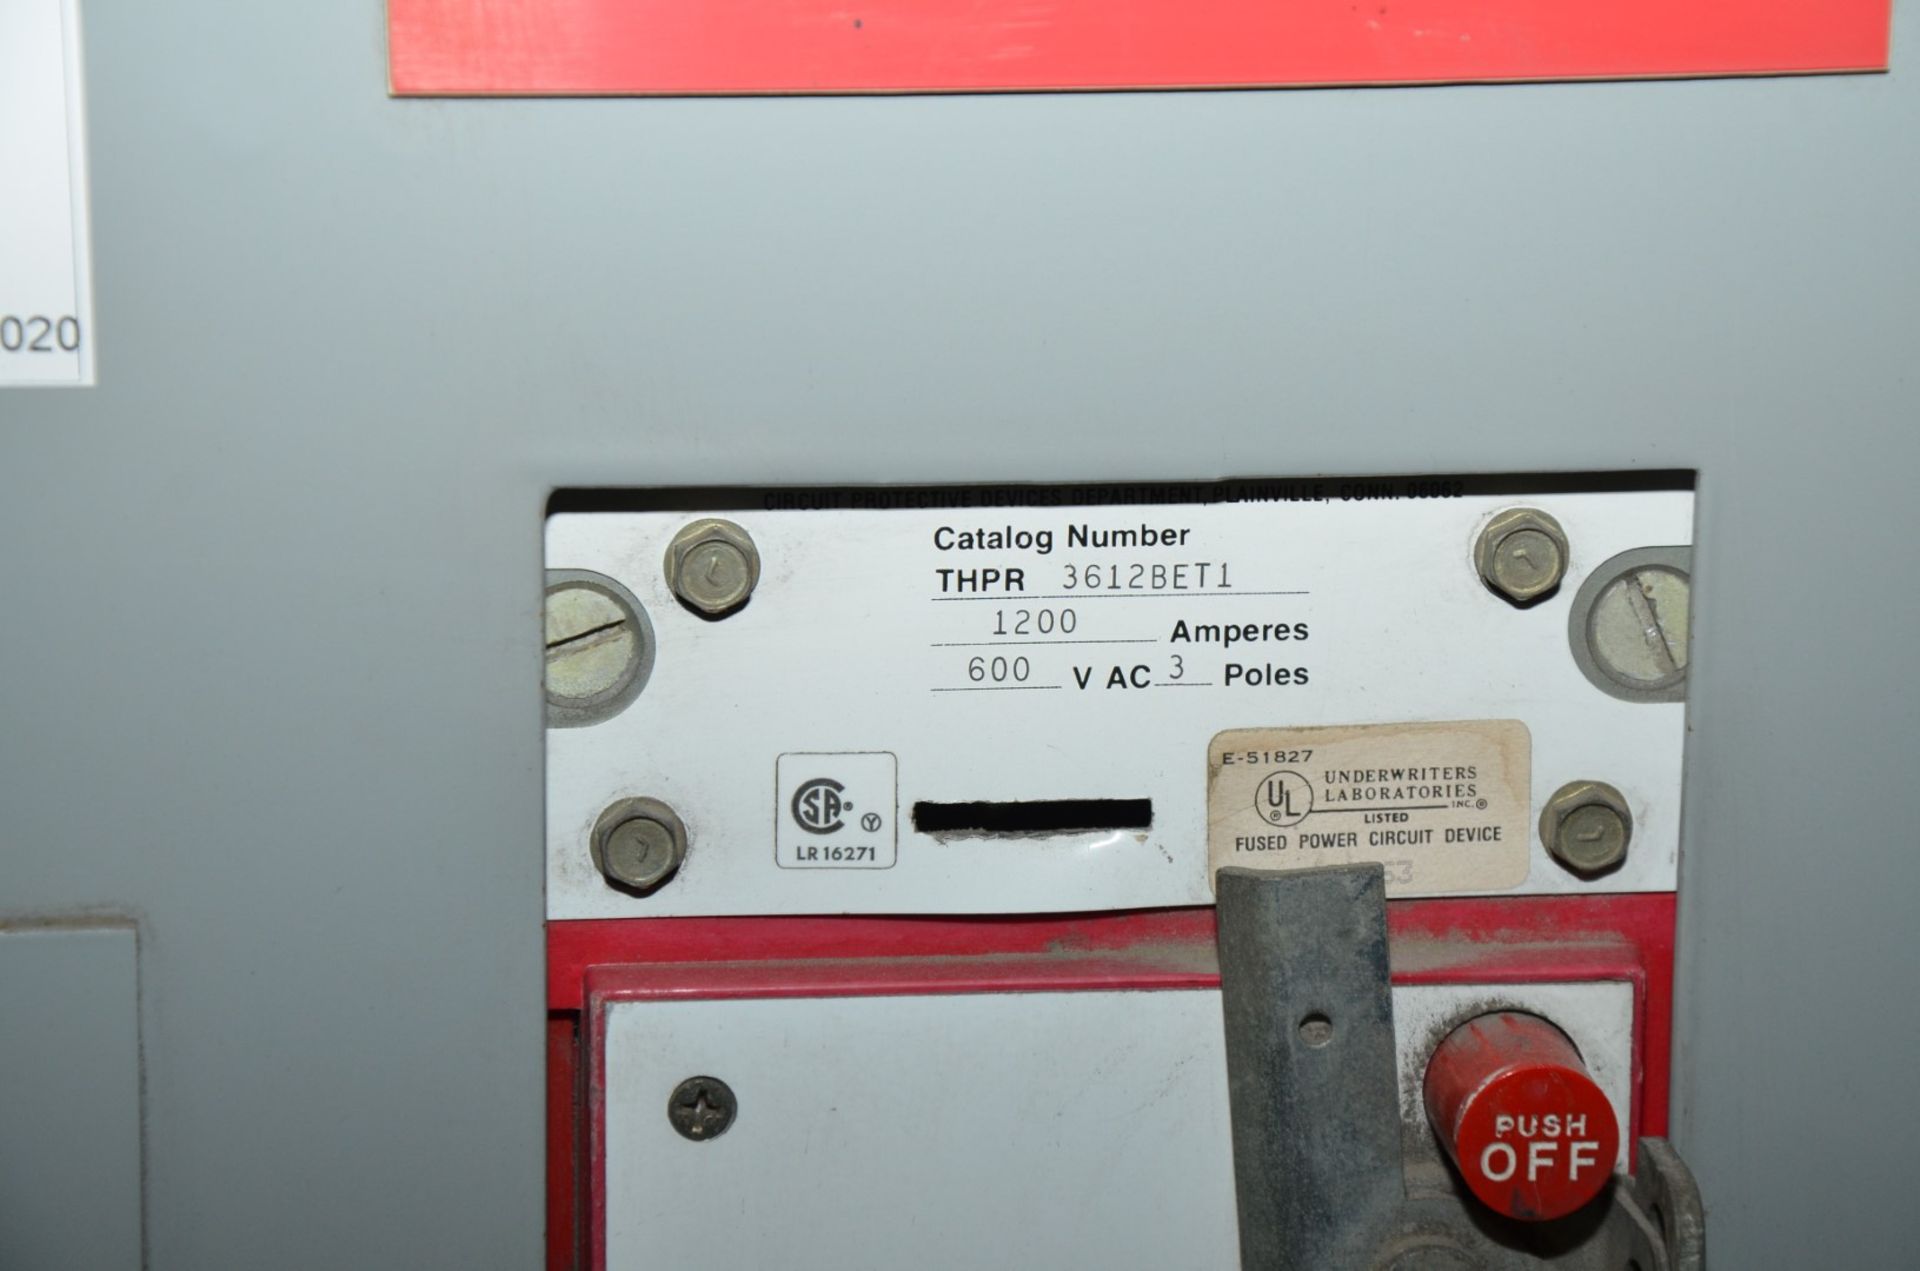 GENERAL ELECTRIC LOAD BREAK SWITCH (CI) [RIGGING FEE FOR LOT #121 - $300 USD PLUS APPLICABLE TAXES] - Image 2 of 2